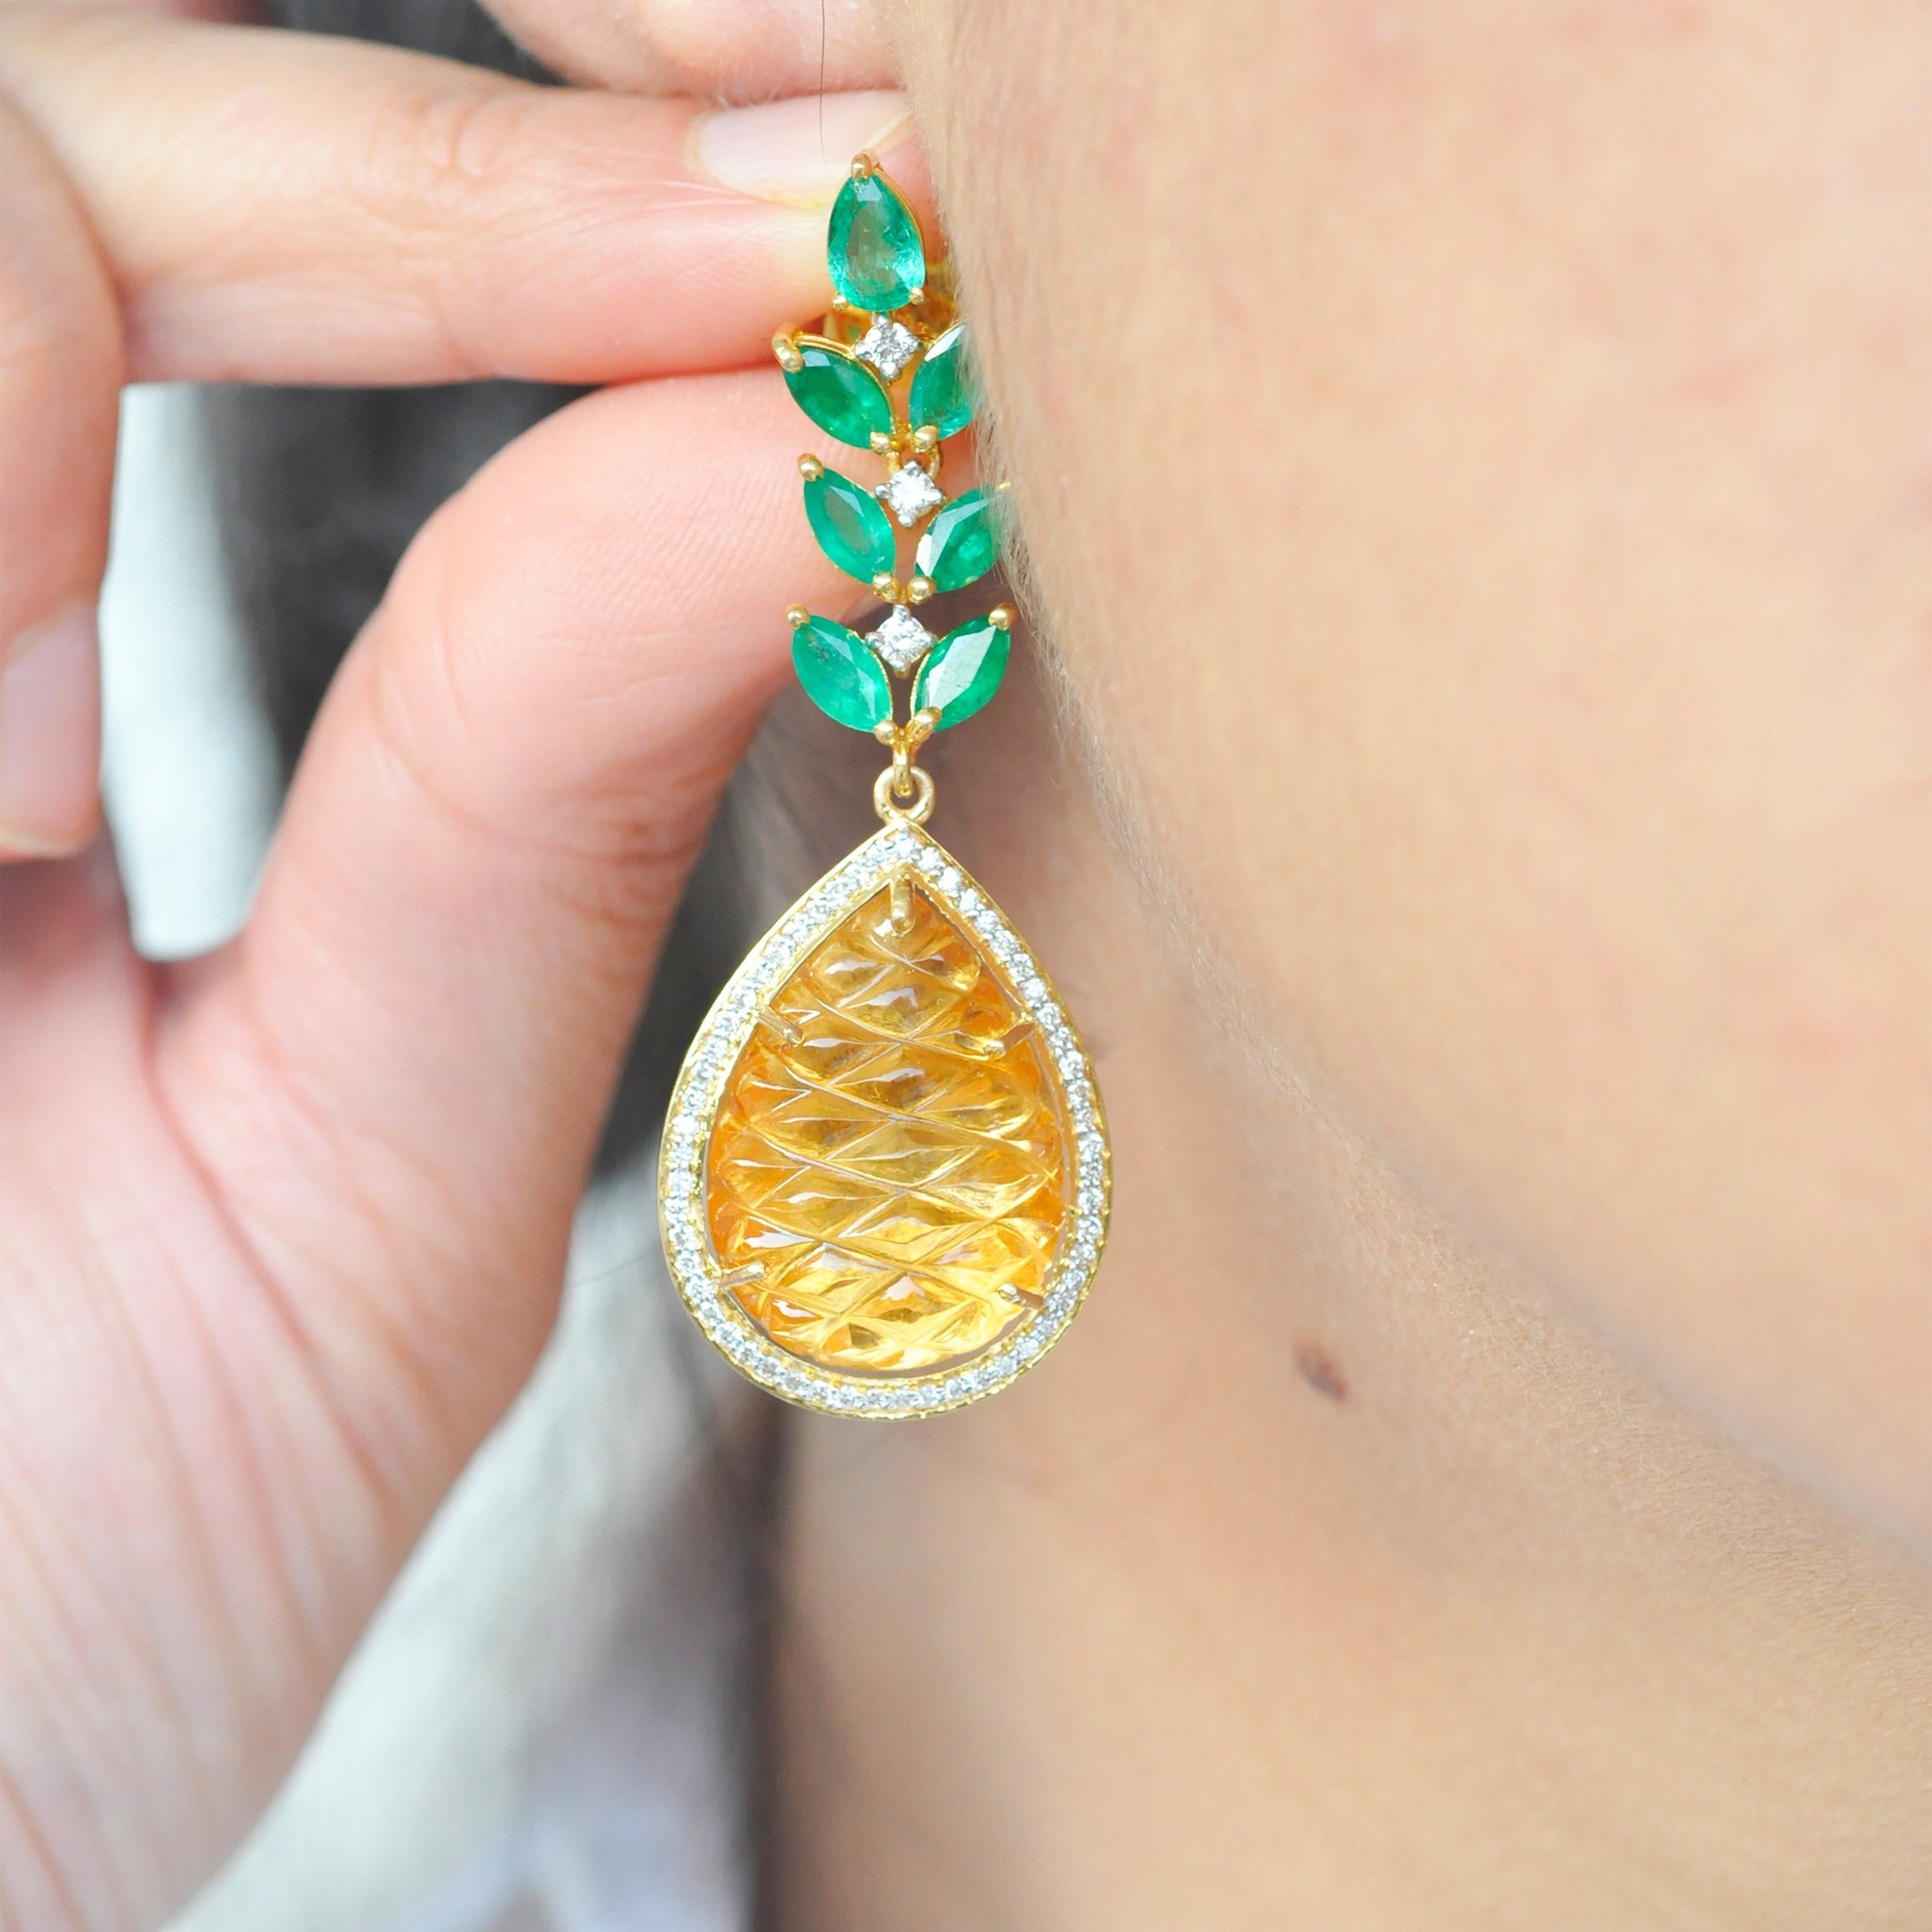 18 karat gold carved citrine emerald diamond pineapple dangle earrings.

Elegance at its best, these hand-carved pineapple cut pear shaped citrine carvings are accentuated with diamonds and emeralds, set in 18K yellow gold. The citrine carving gives